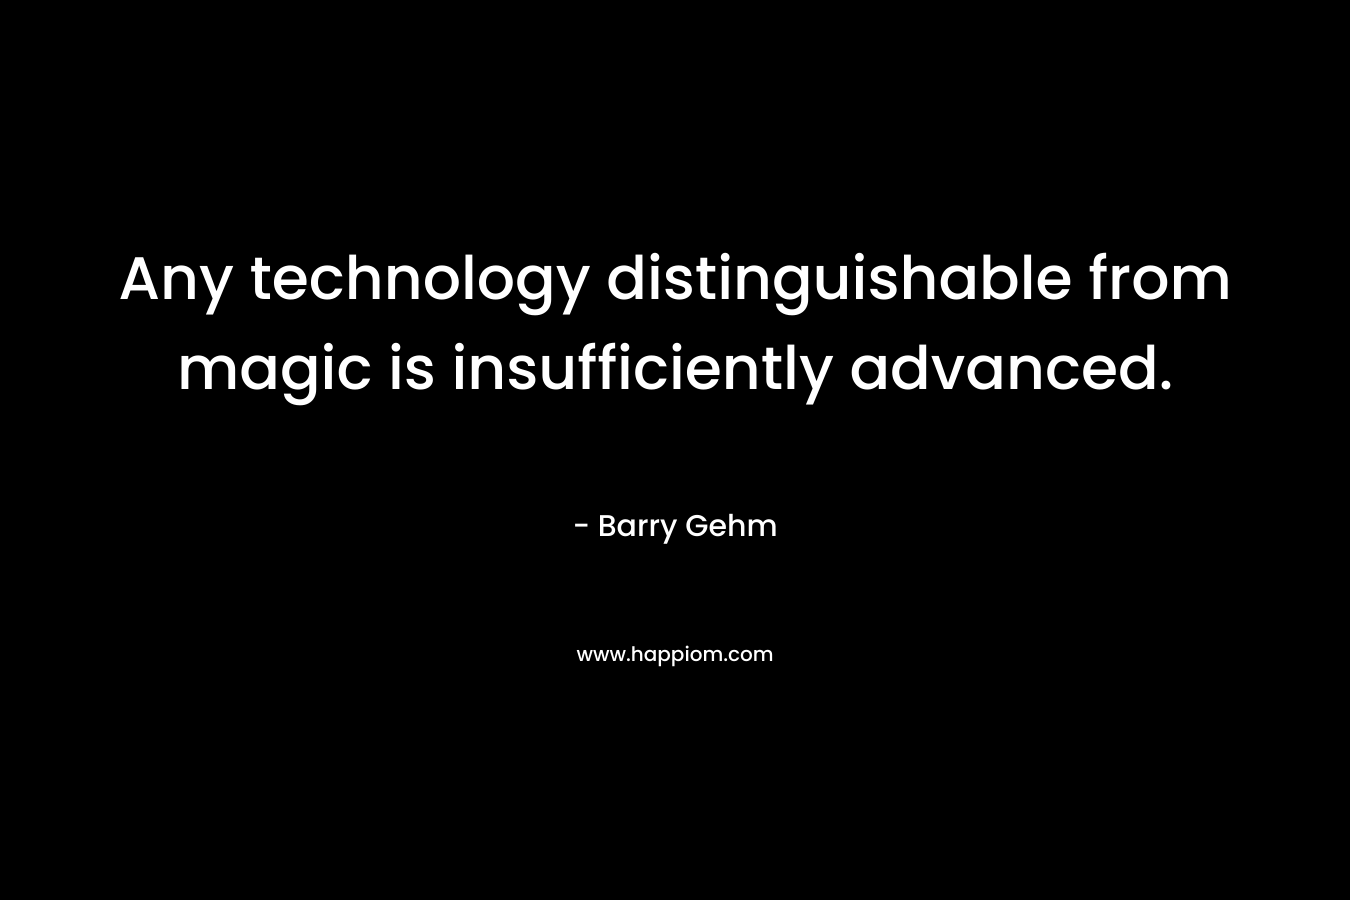 Any technology distinguishable from magic is insufficiently advanced.